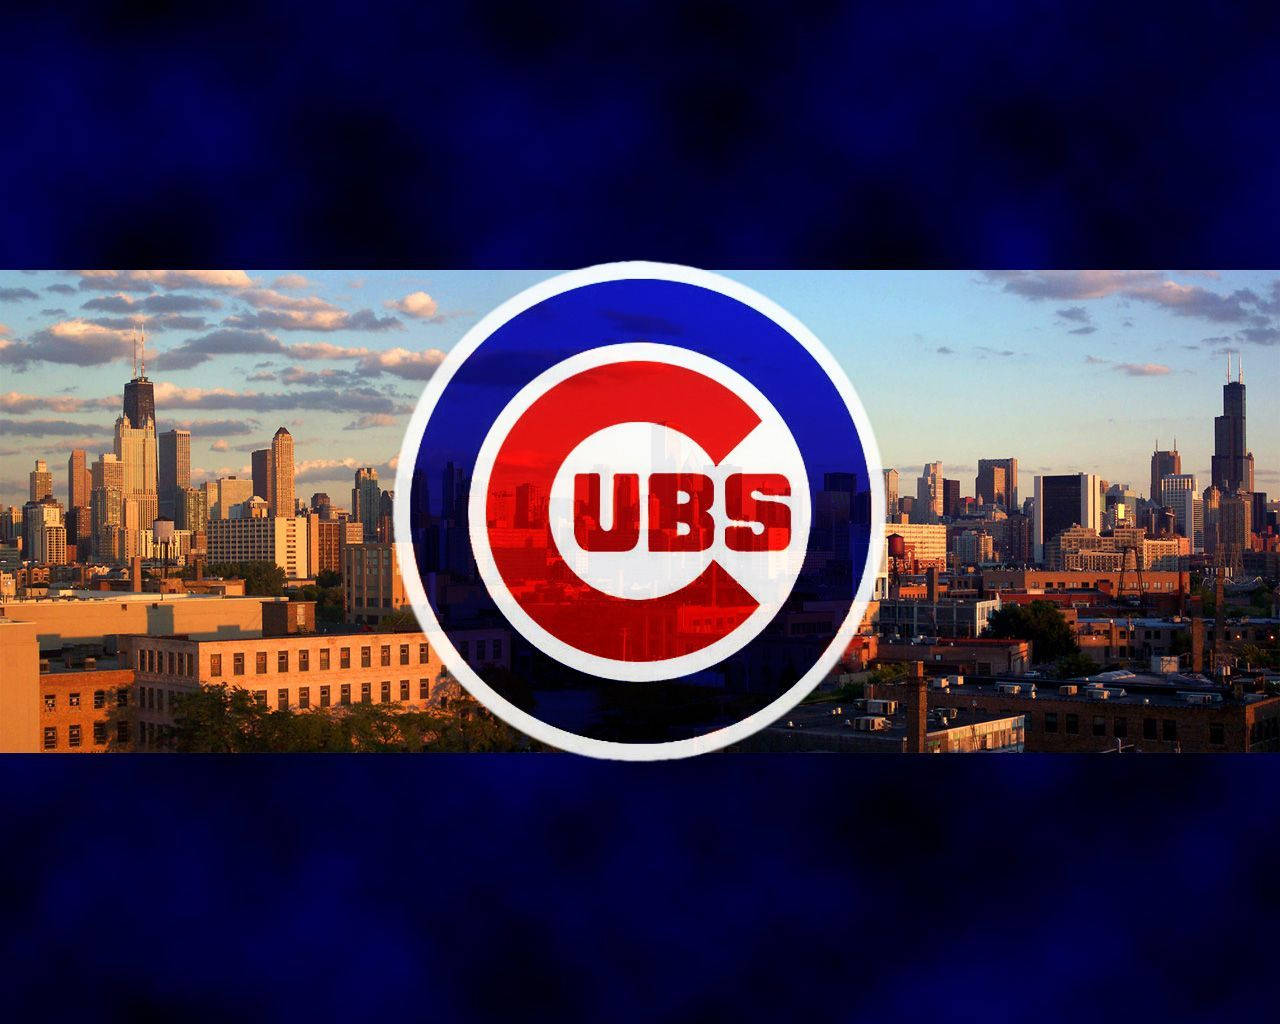 Chicago Cubs On City Buildings Background